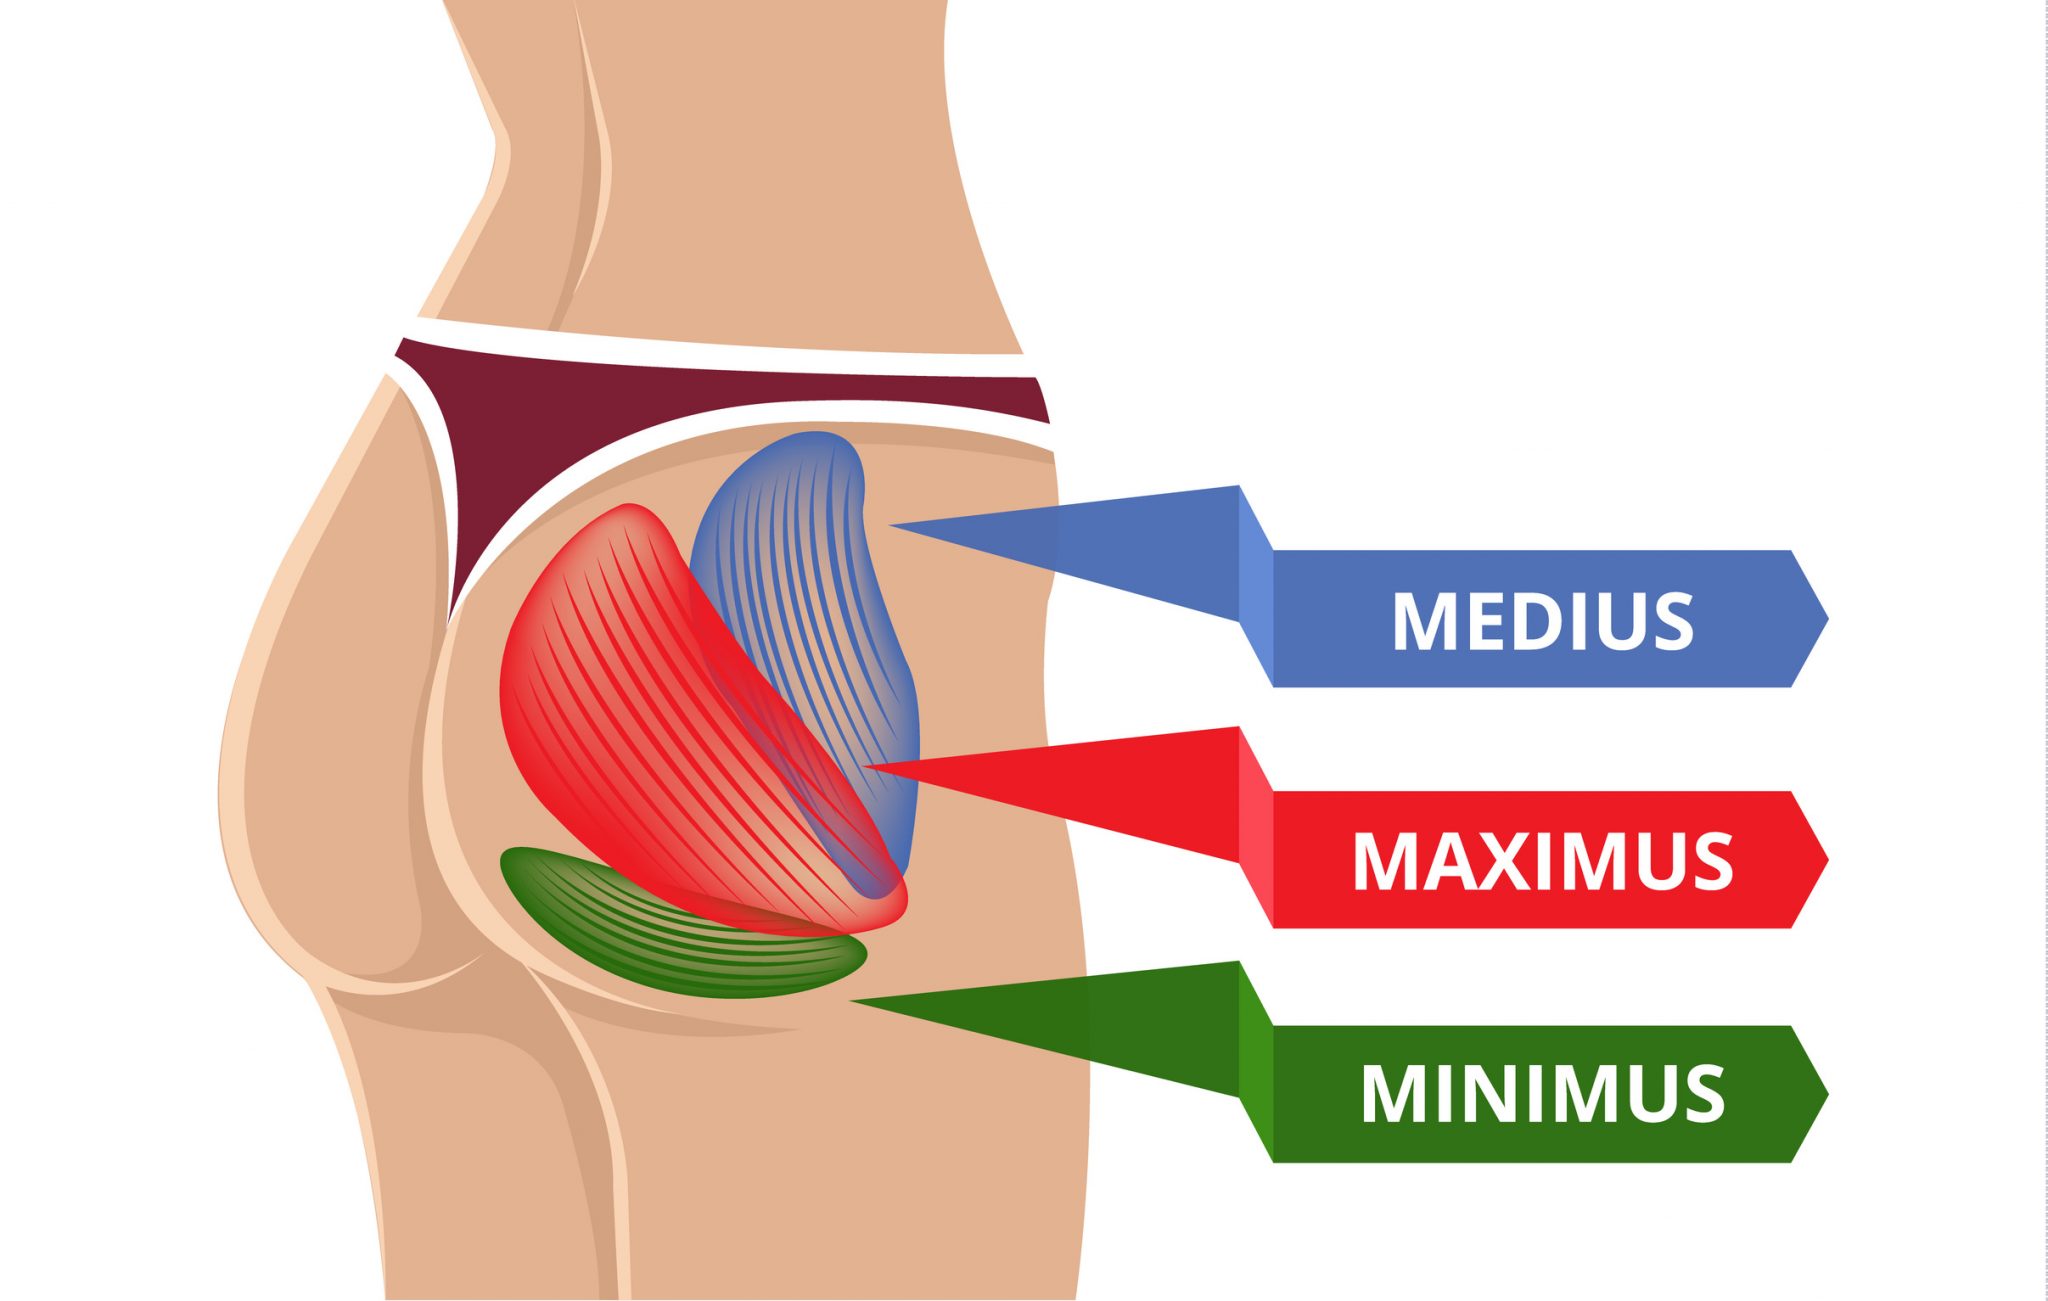 Gluteus muscles